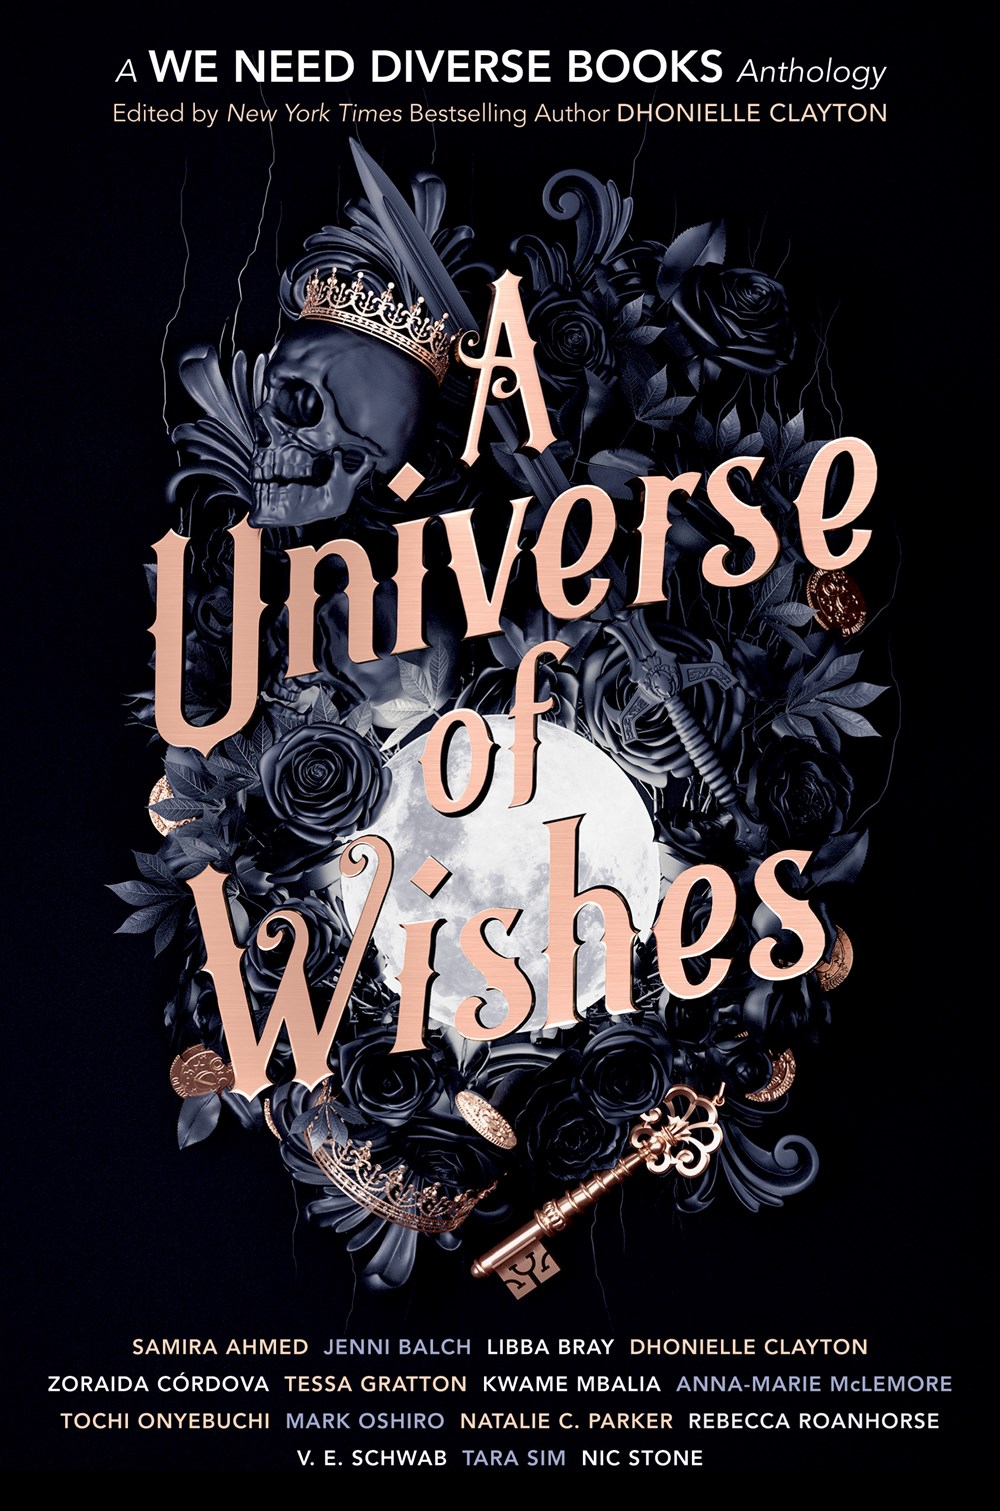 [EPUB] A Universe of Wishes: A We Need Diverse Books Anthology by Dhonielle Clayton  (Editor)